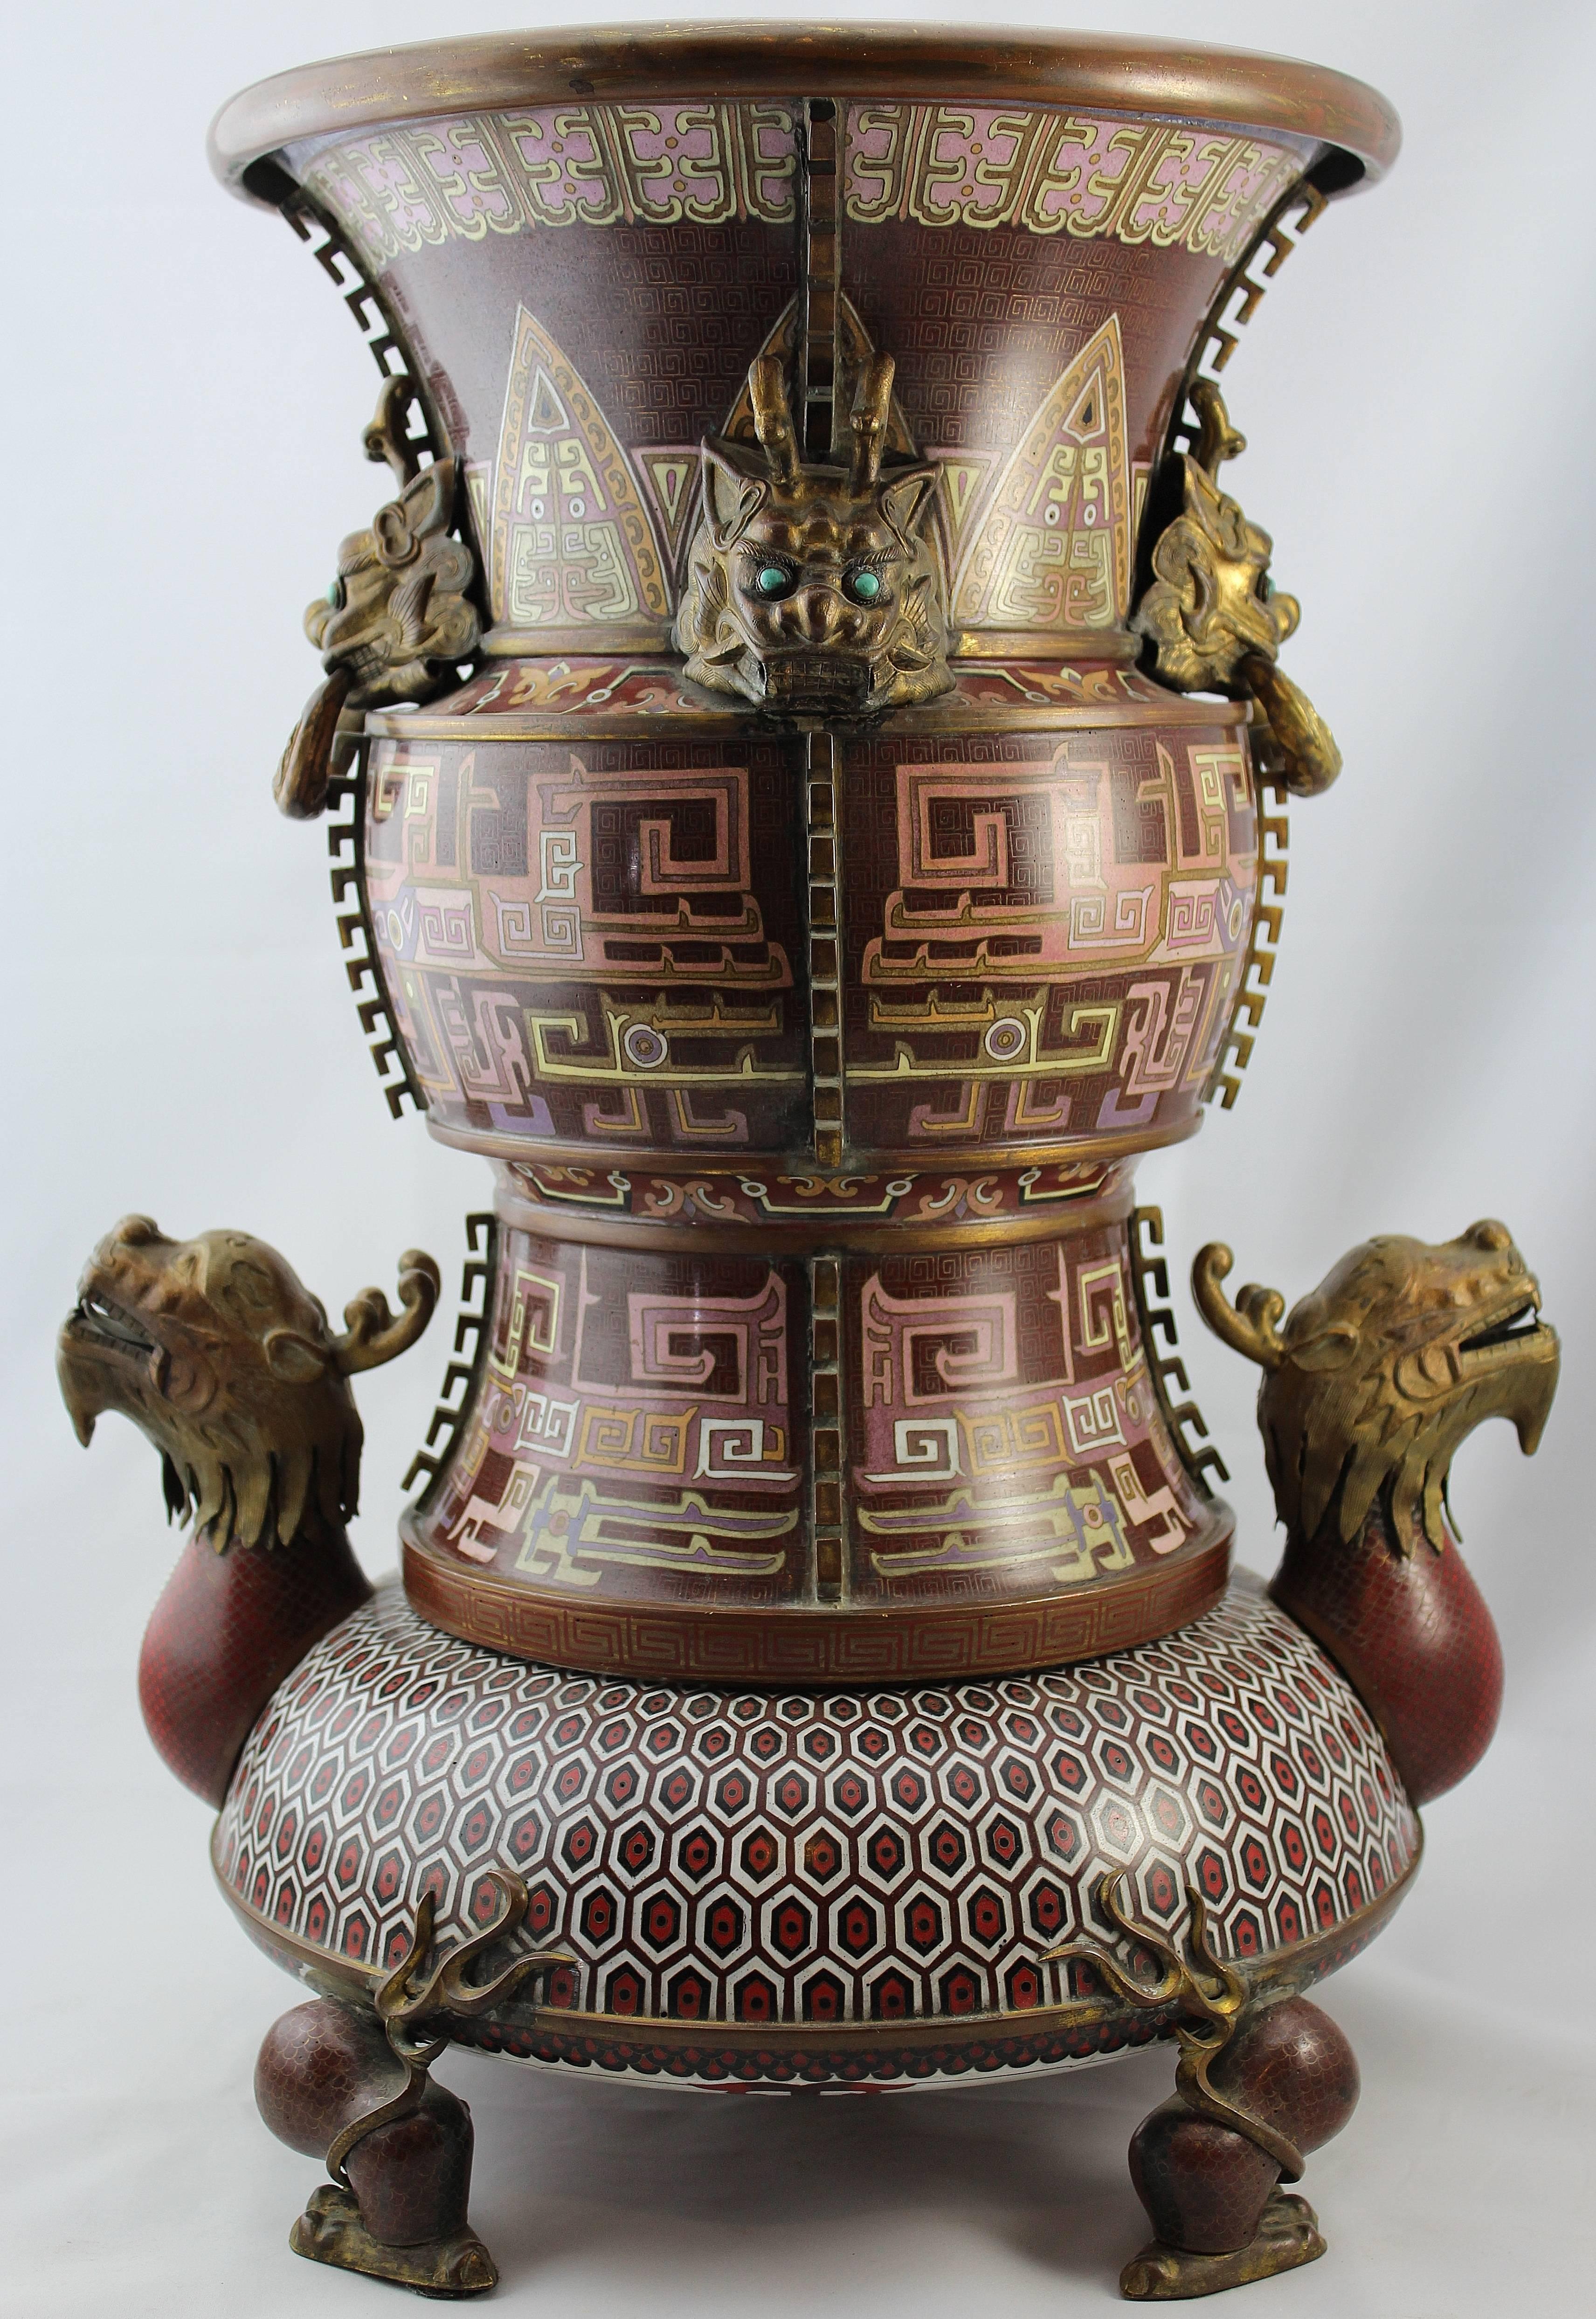 Museum Chinese Cloisonne bronze two-piece planter Gui vase from the late Qing period. 19th century. Superlative cloisonne craftsmanship makes this two-piece treasure with four dragon feet and heads with turquoise eyes. Absolutely magnificent! Mixed